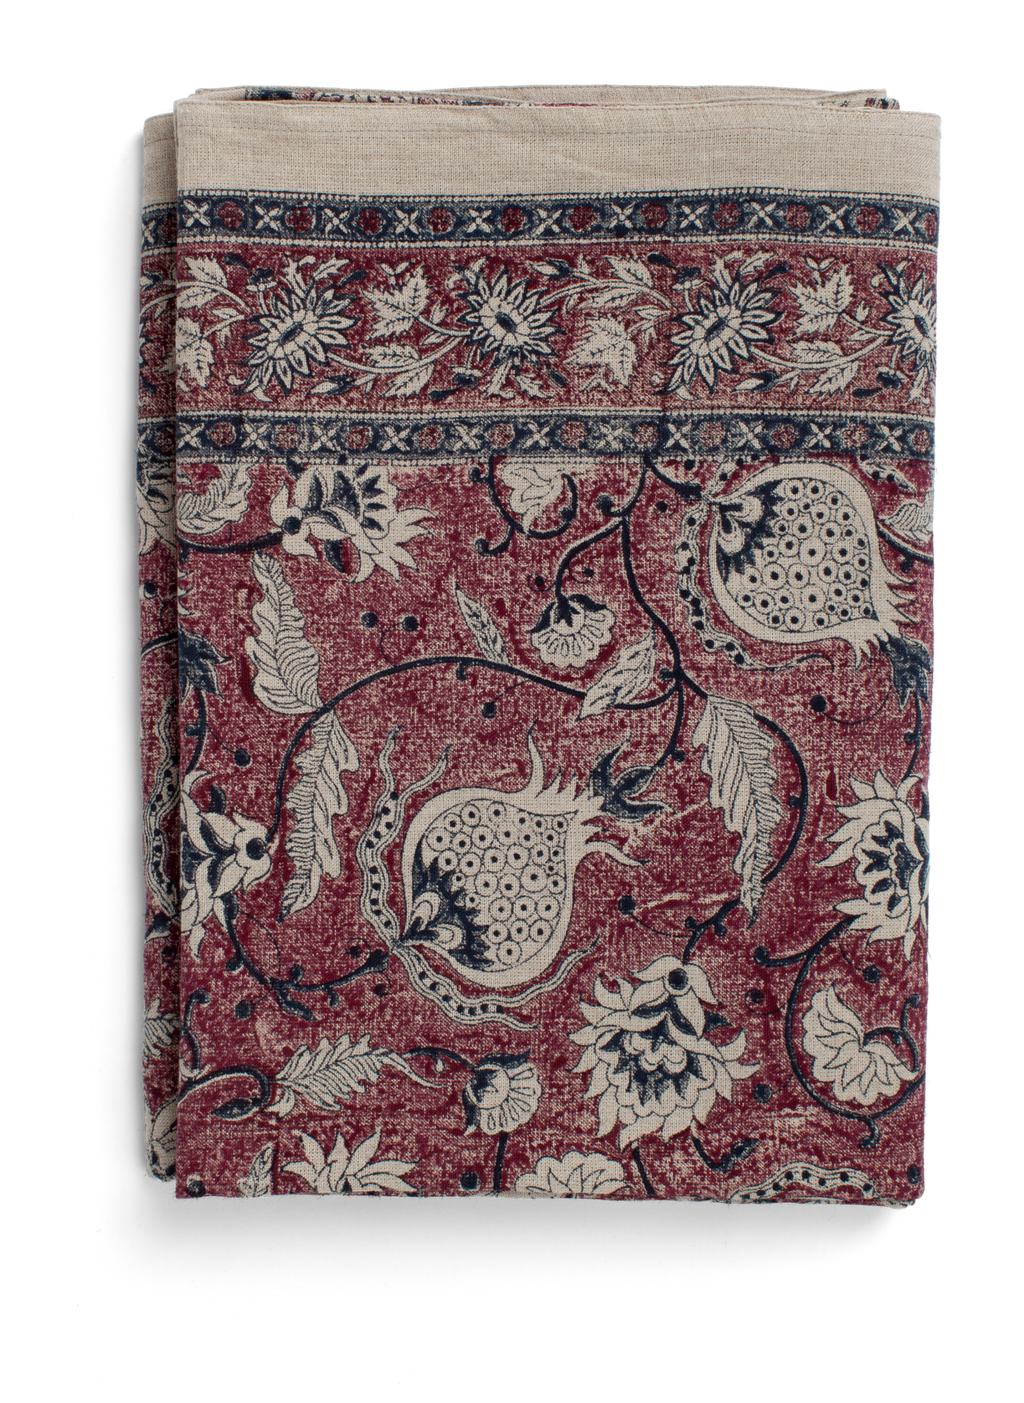 Linen tablecloth with Pomegranate print in Burgundy